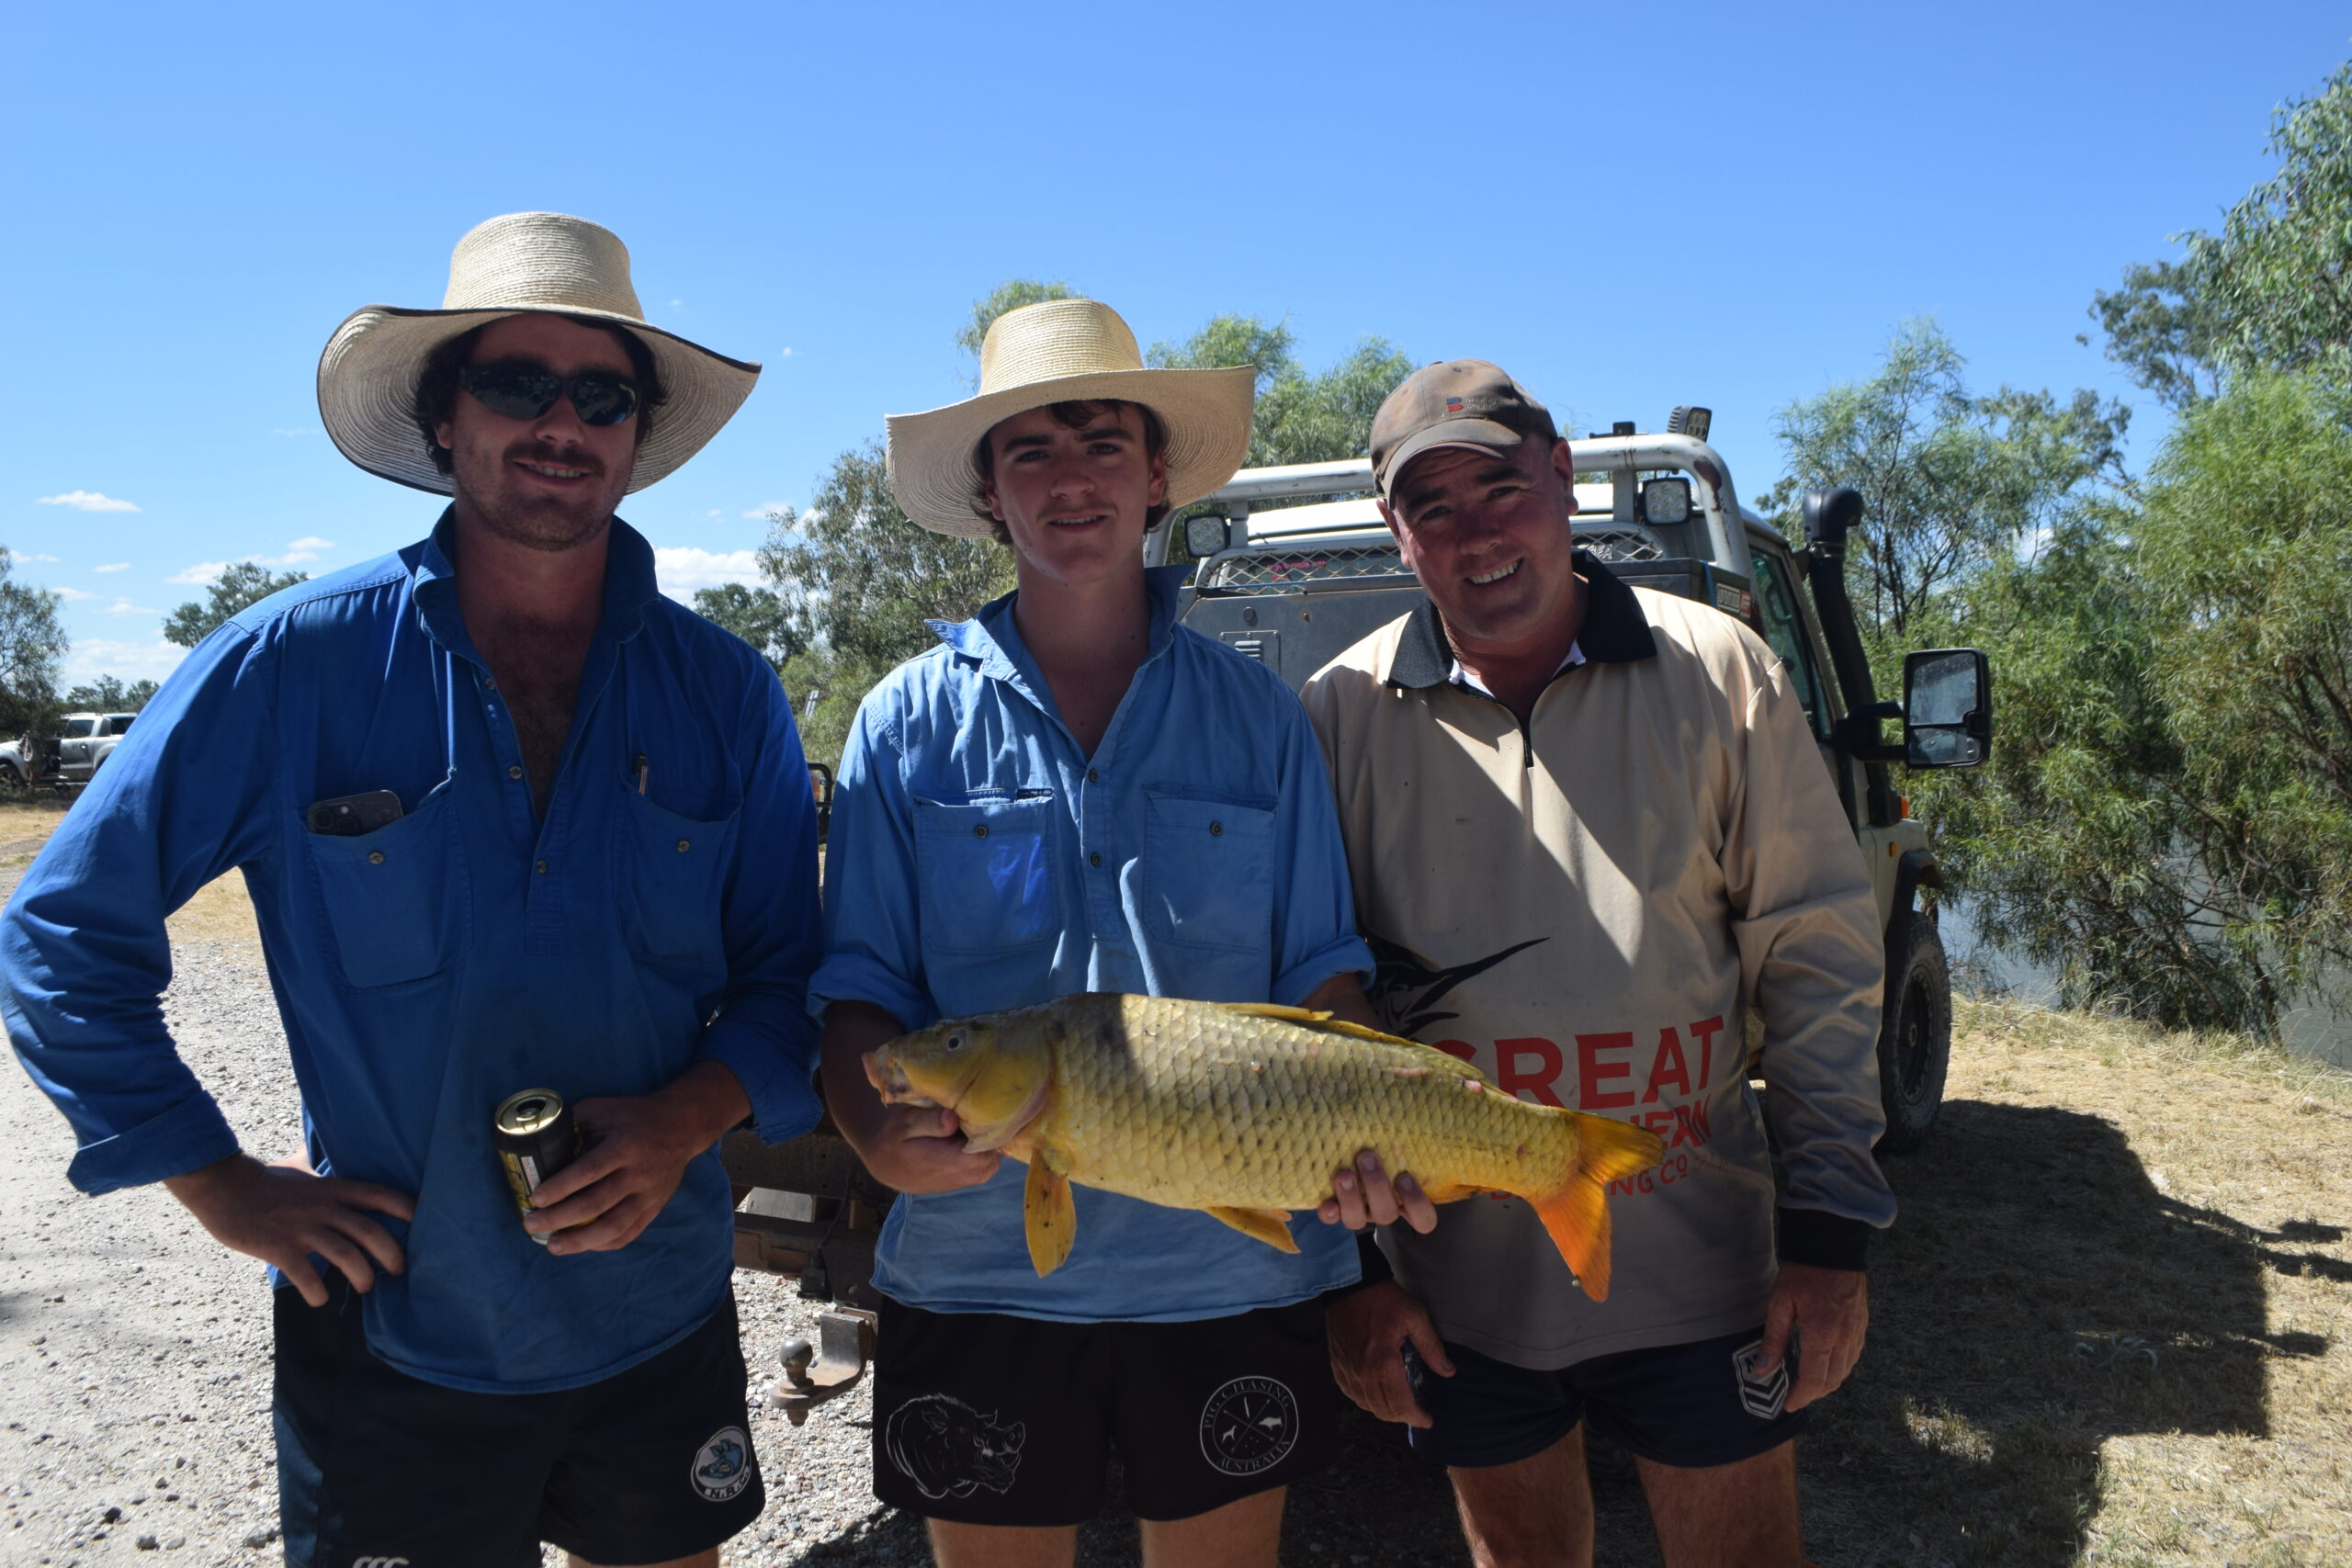 Wee Waa Carp muster catches big crowd on Australia Day